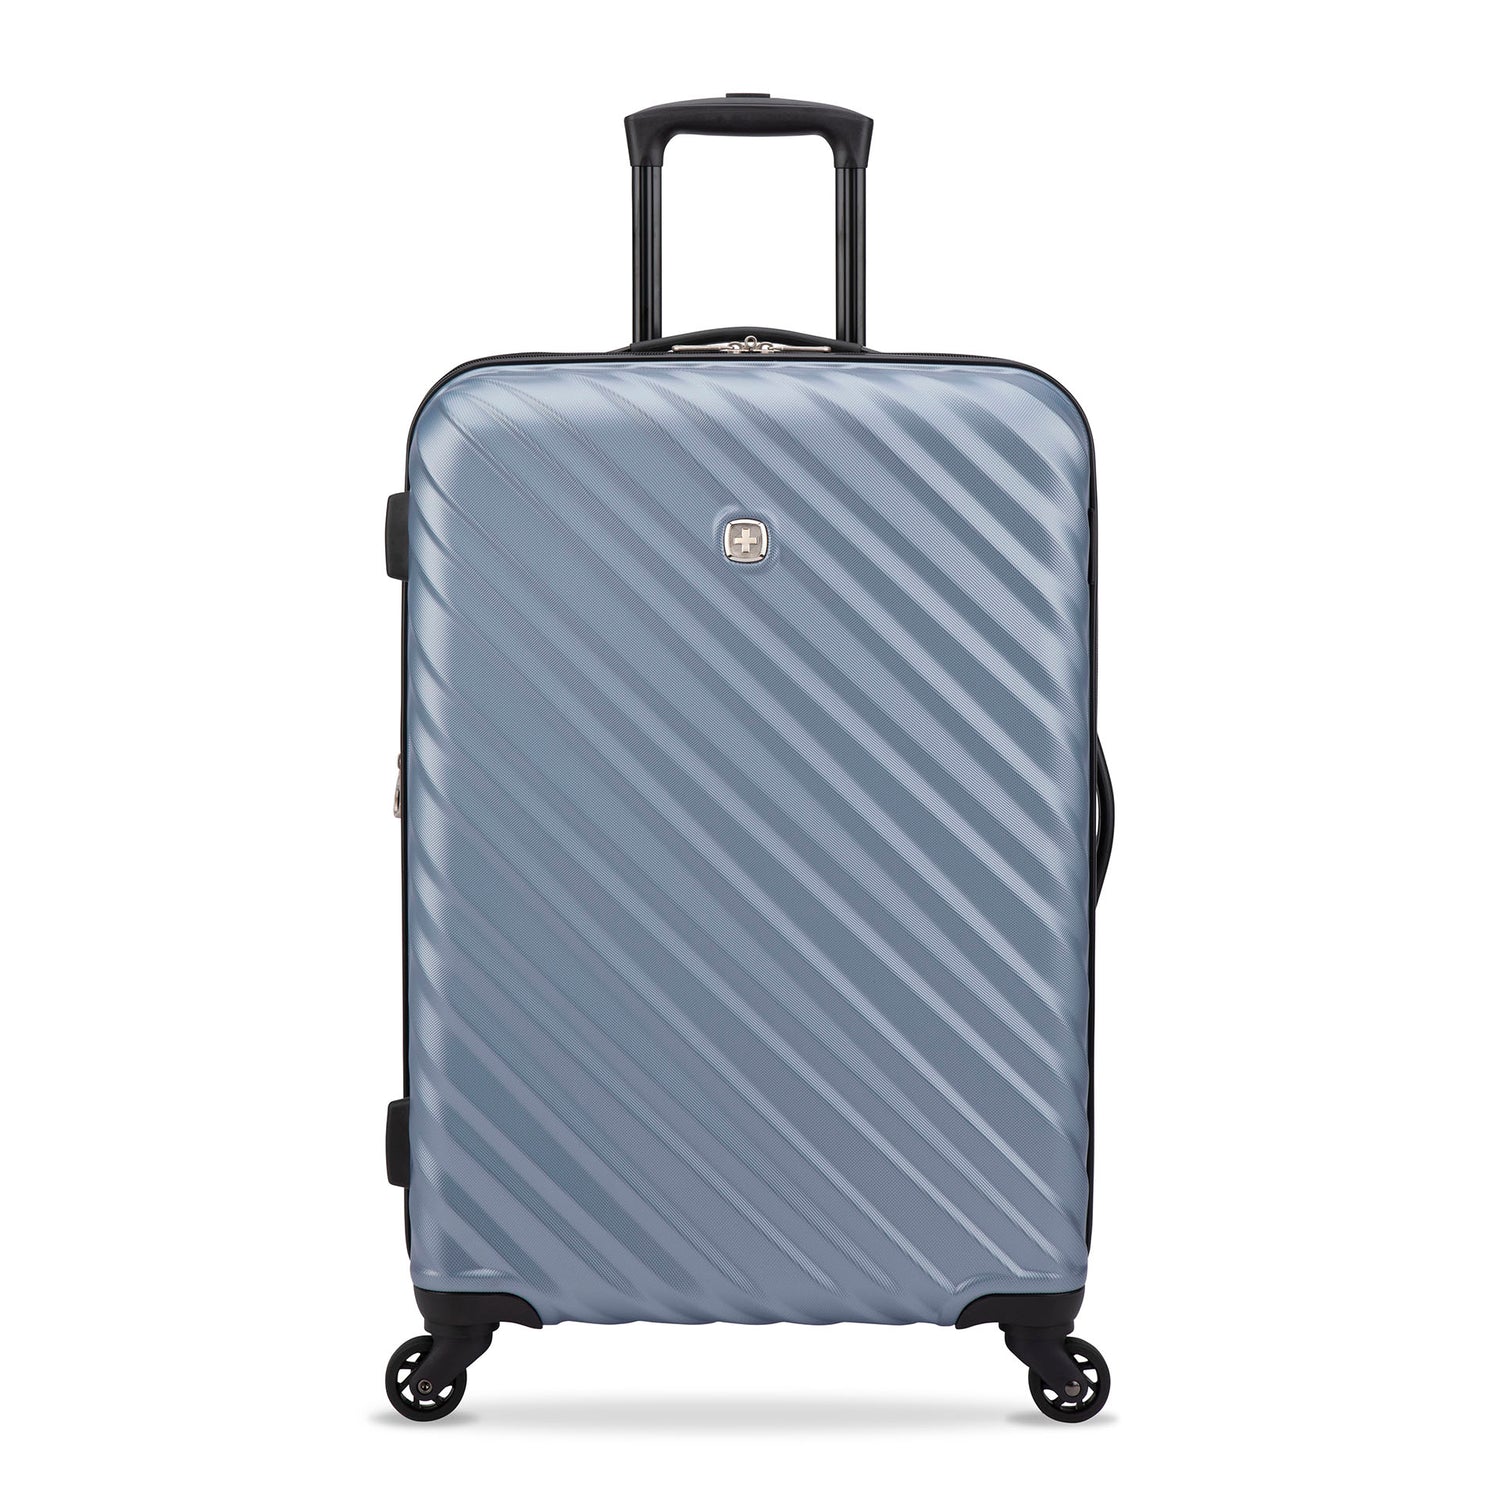 Front side view of a silverish blue hard side luggage called MOD designed by Swiss Gear sold at Bentley, showcasing its telescopic handle and resistant-absorbant texture.